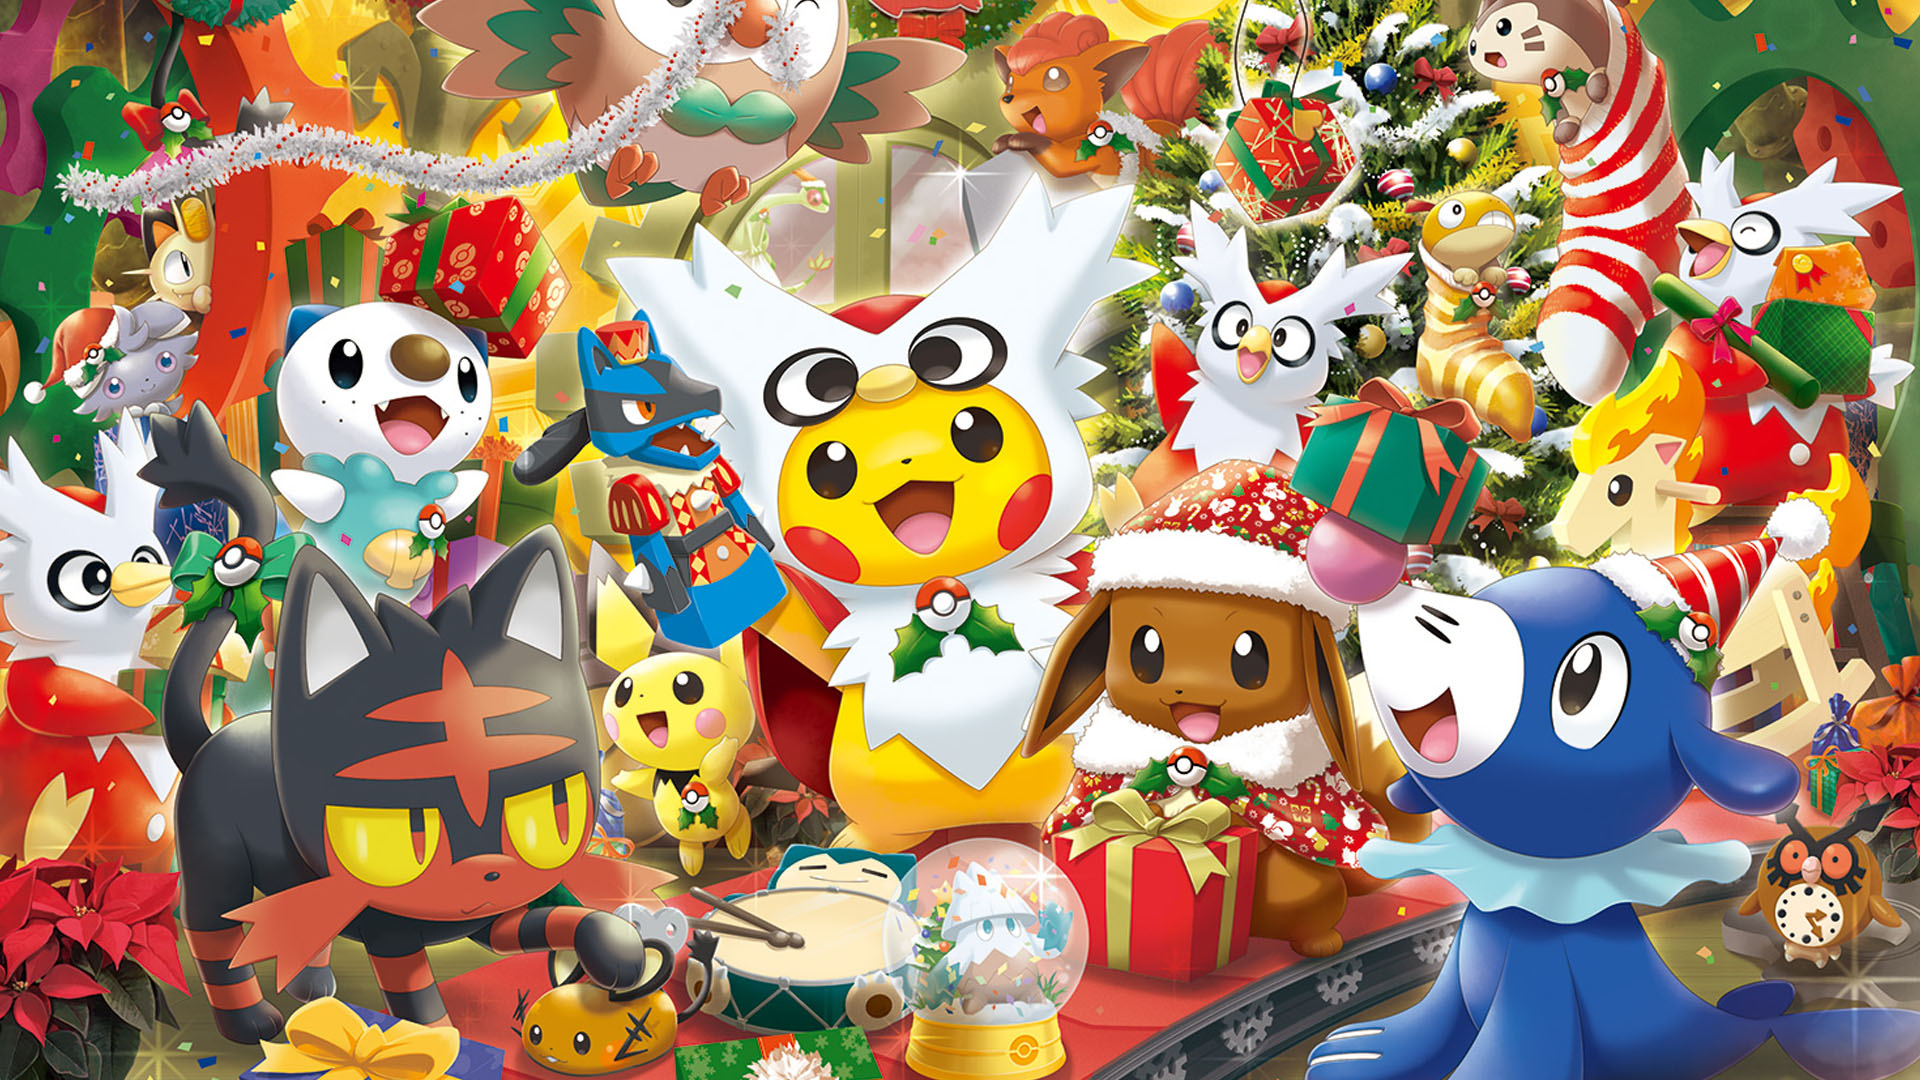 Winter and Christmas merch coming to Pokémon Centers in Japan.